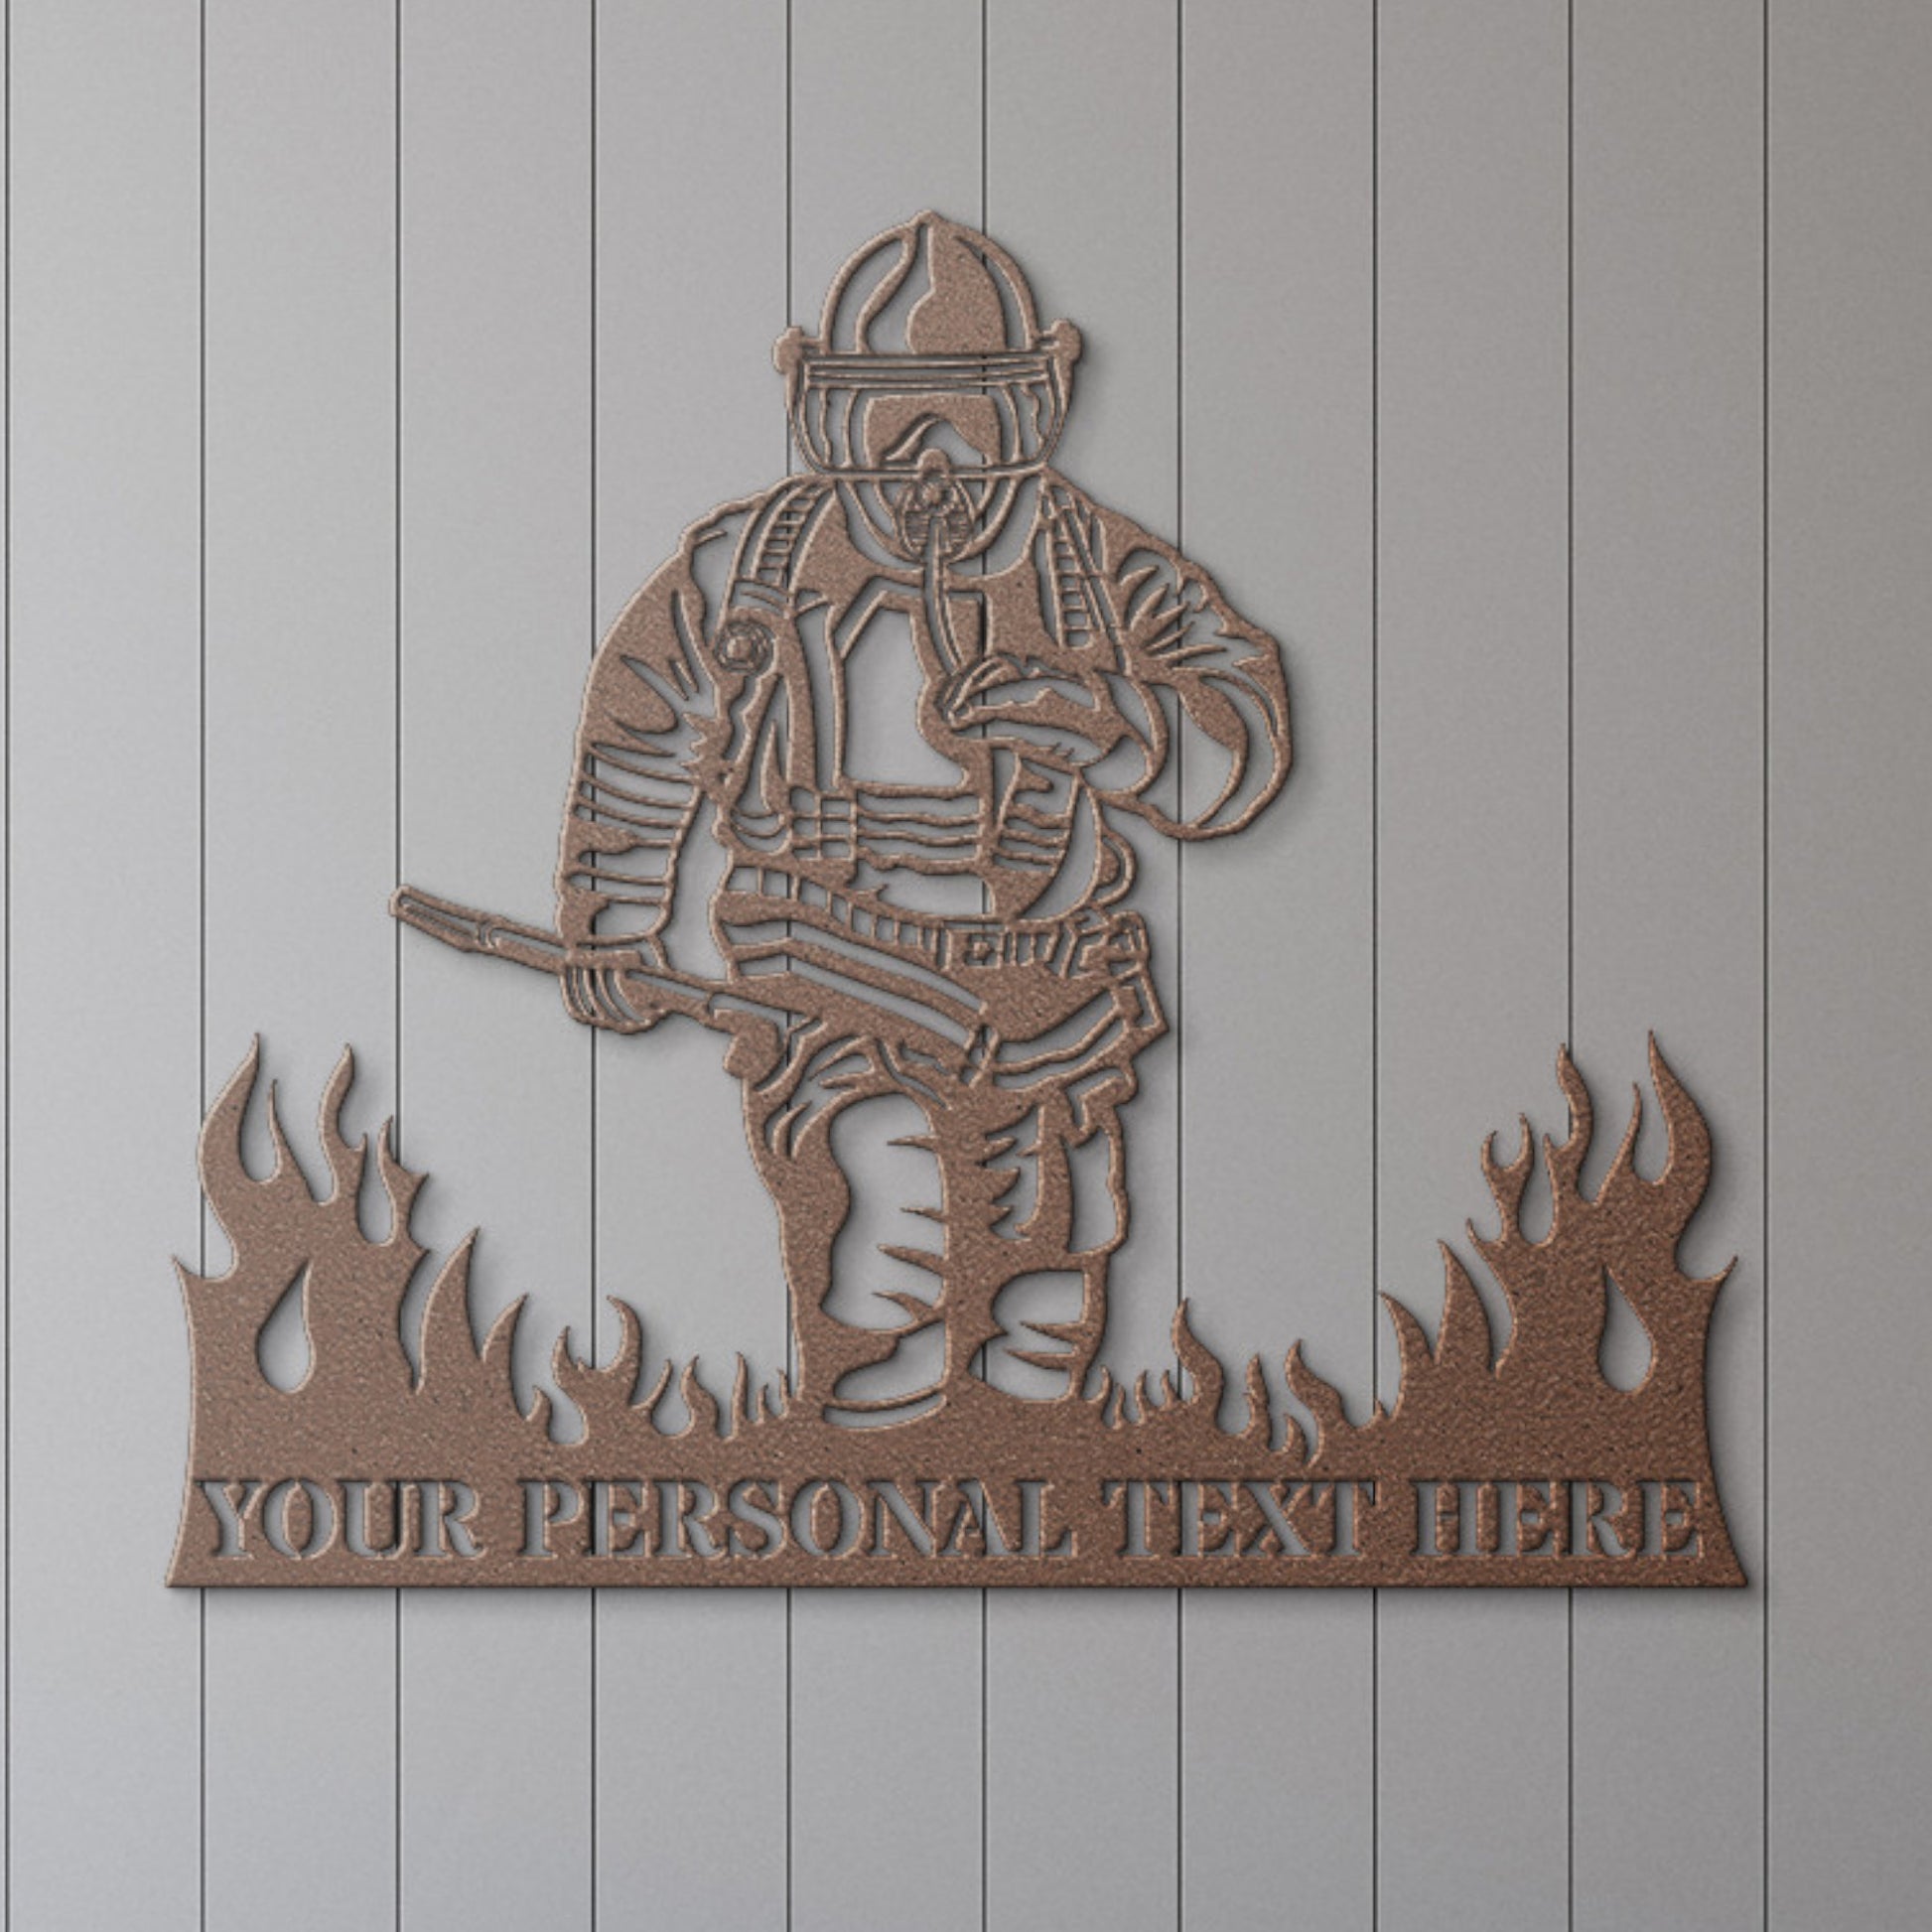 Personalized Fireman In Flames Name Metal Art. Custom Firefighter Volunteer Wall Decor. Customize Fire department Wall Hanging. To My HeroPersonalized Fireman In Flames Name Metal Art. Custom Firefighter Volunteer Wall Decor. Customize Fire department Wall Hanging. To My Hero